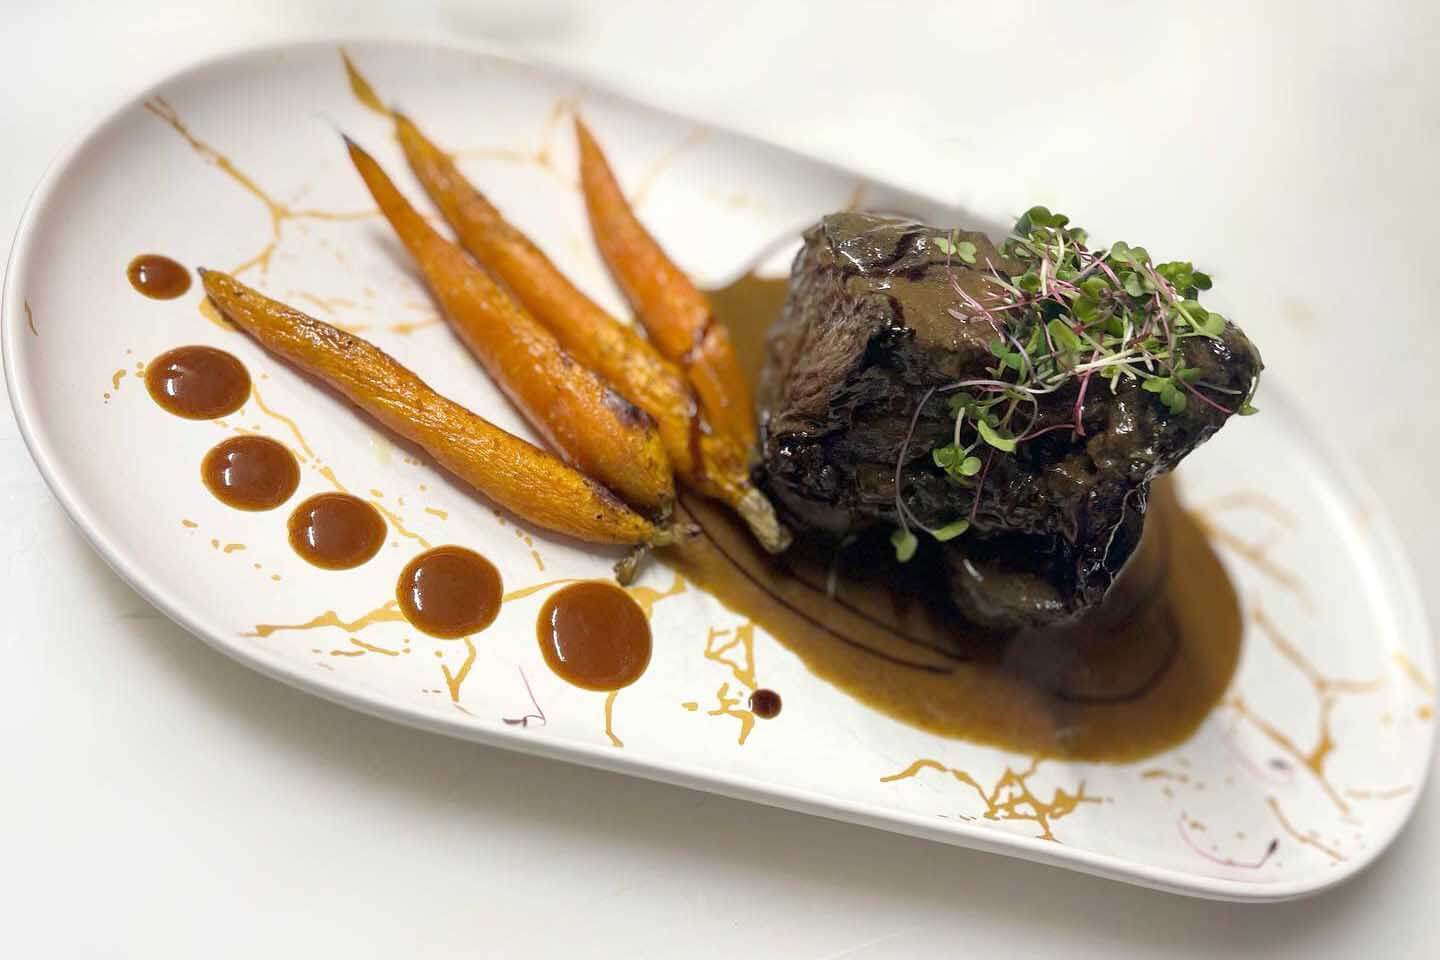 Katya Vineyards beef and carrots on a plate.